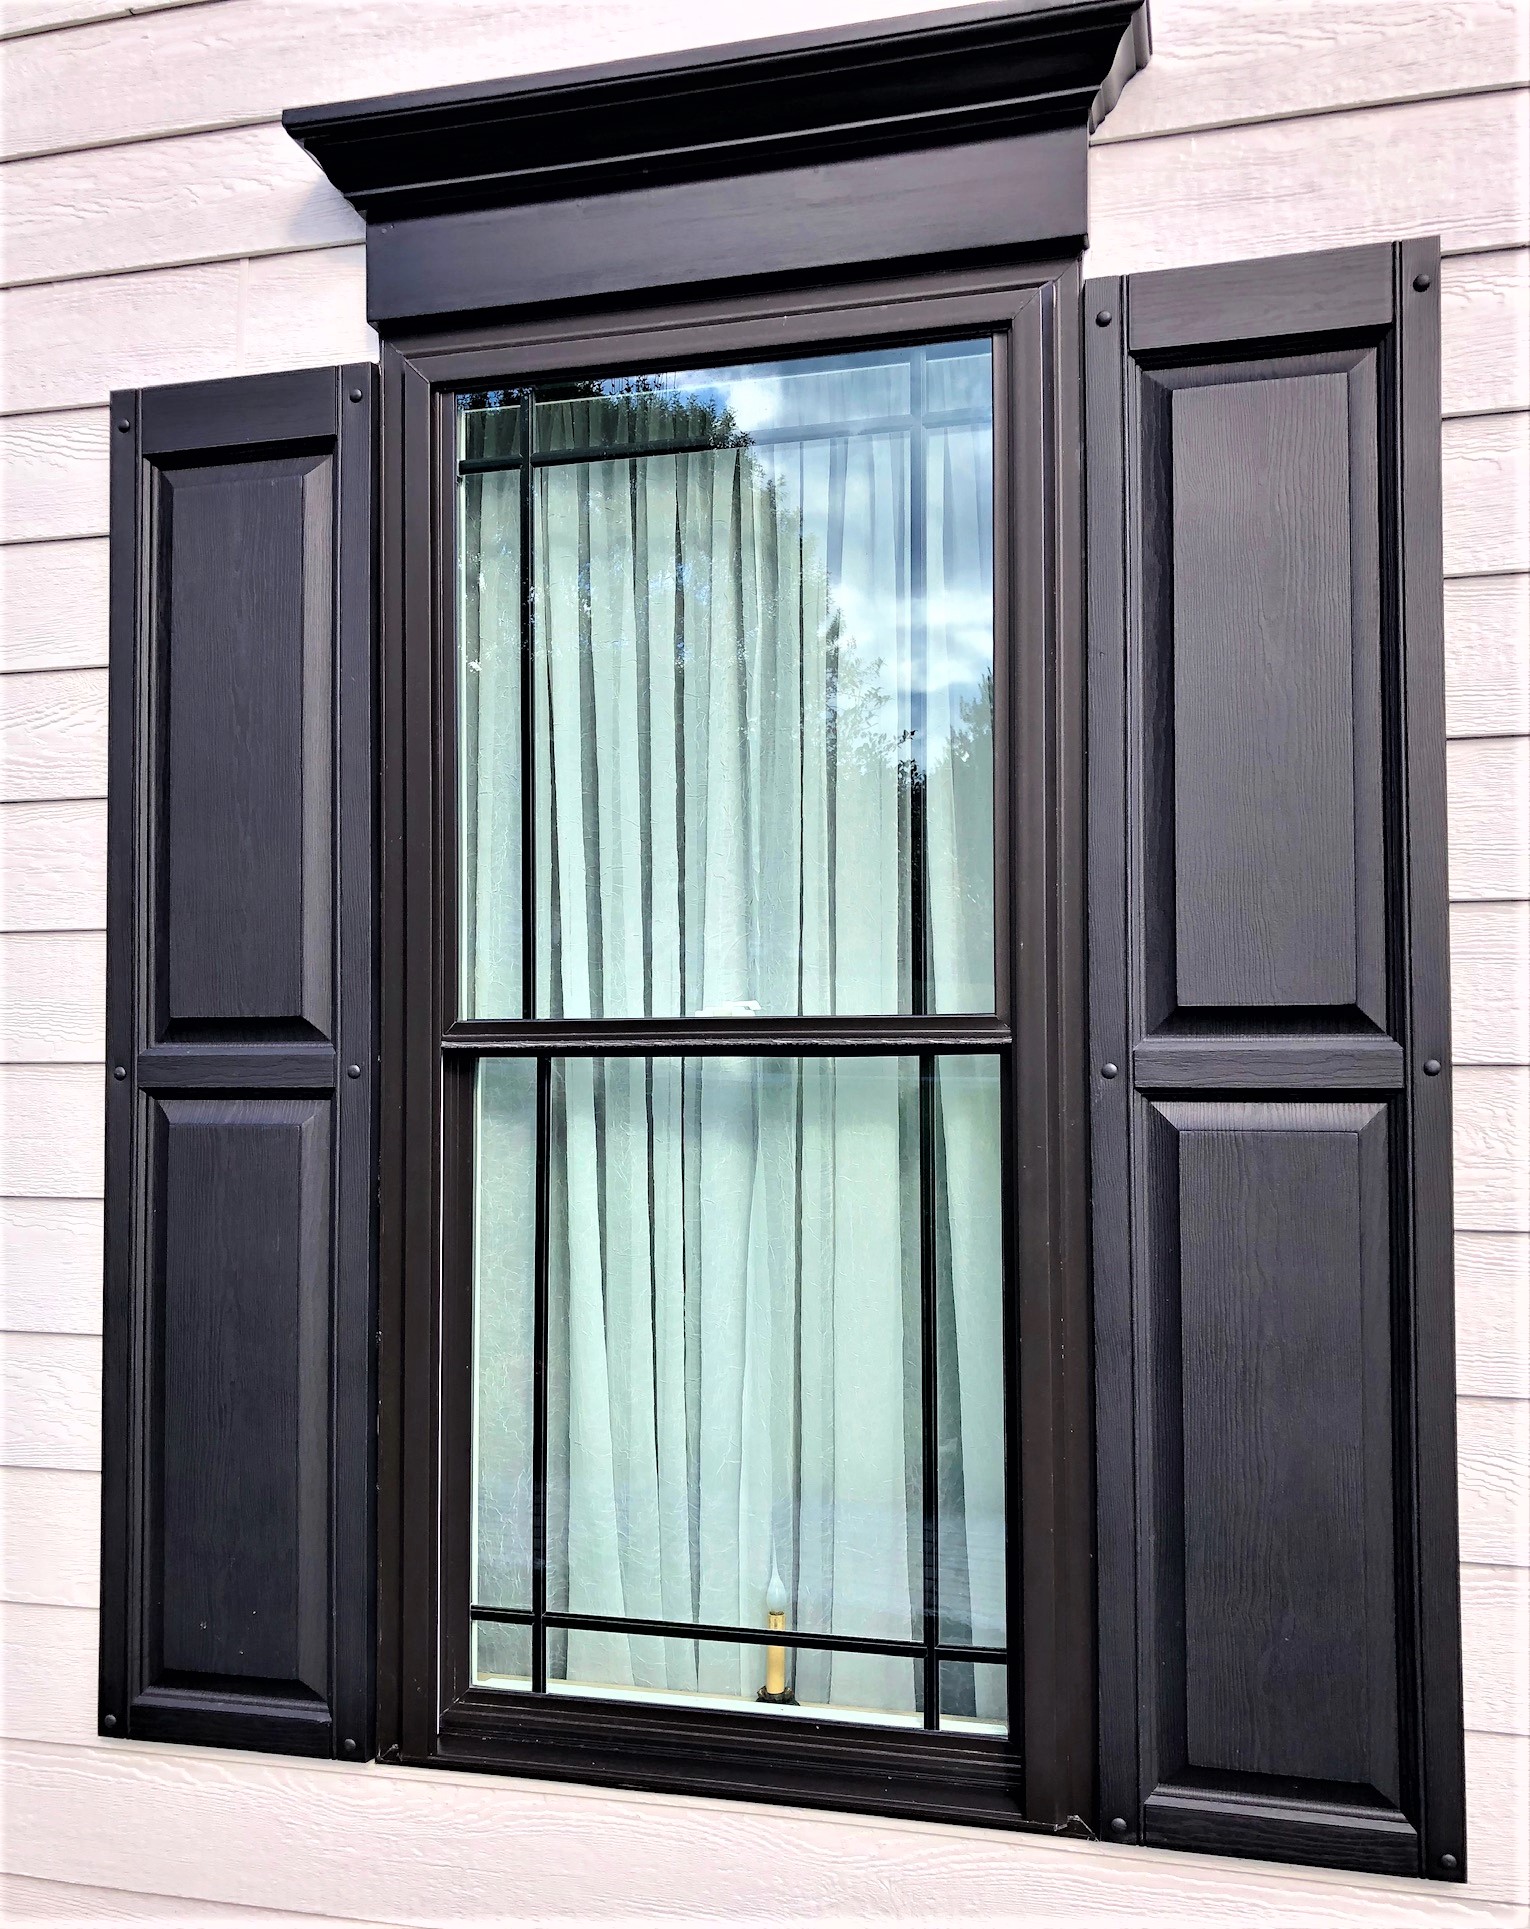 New window with black shutters